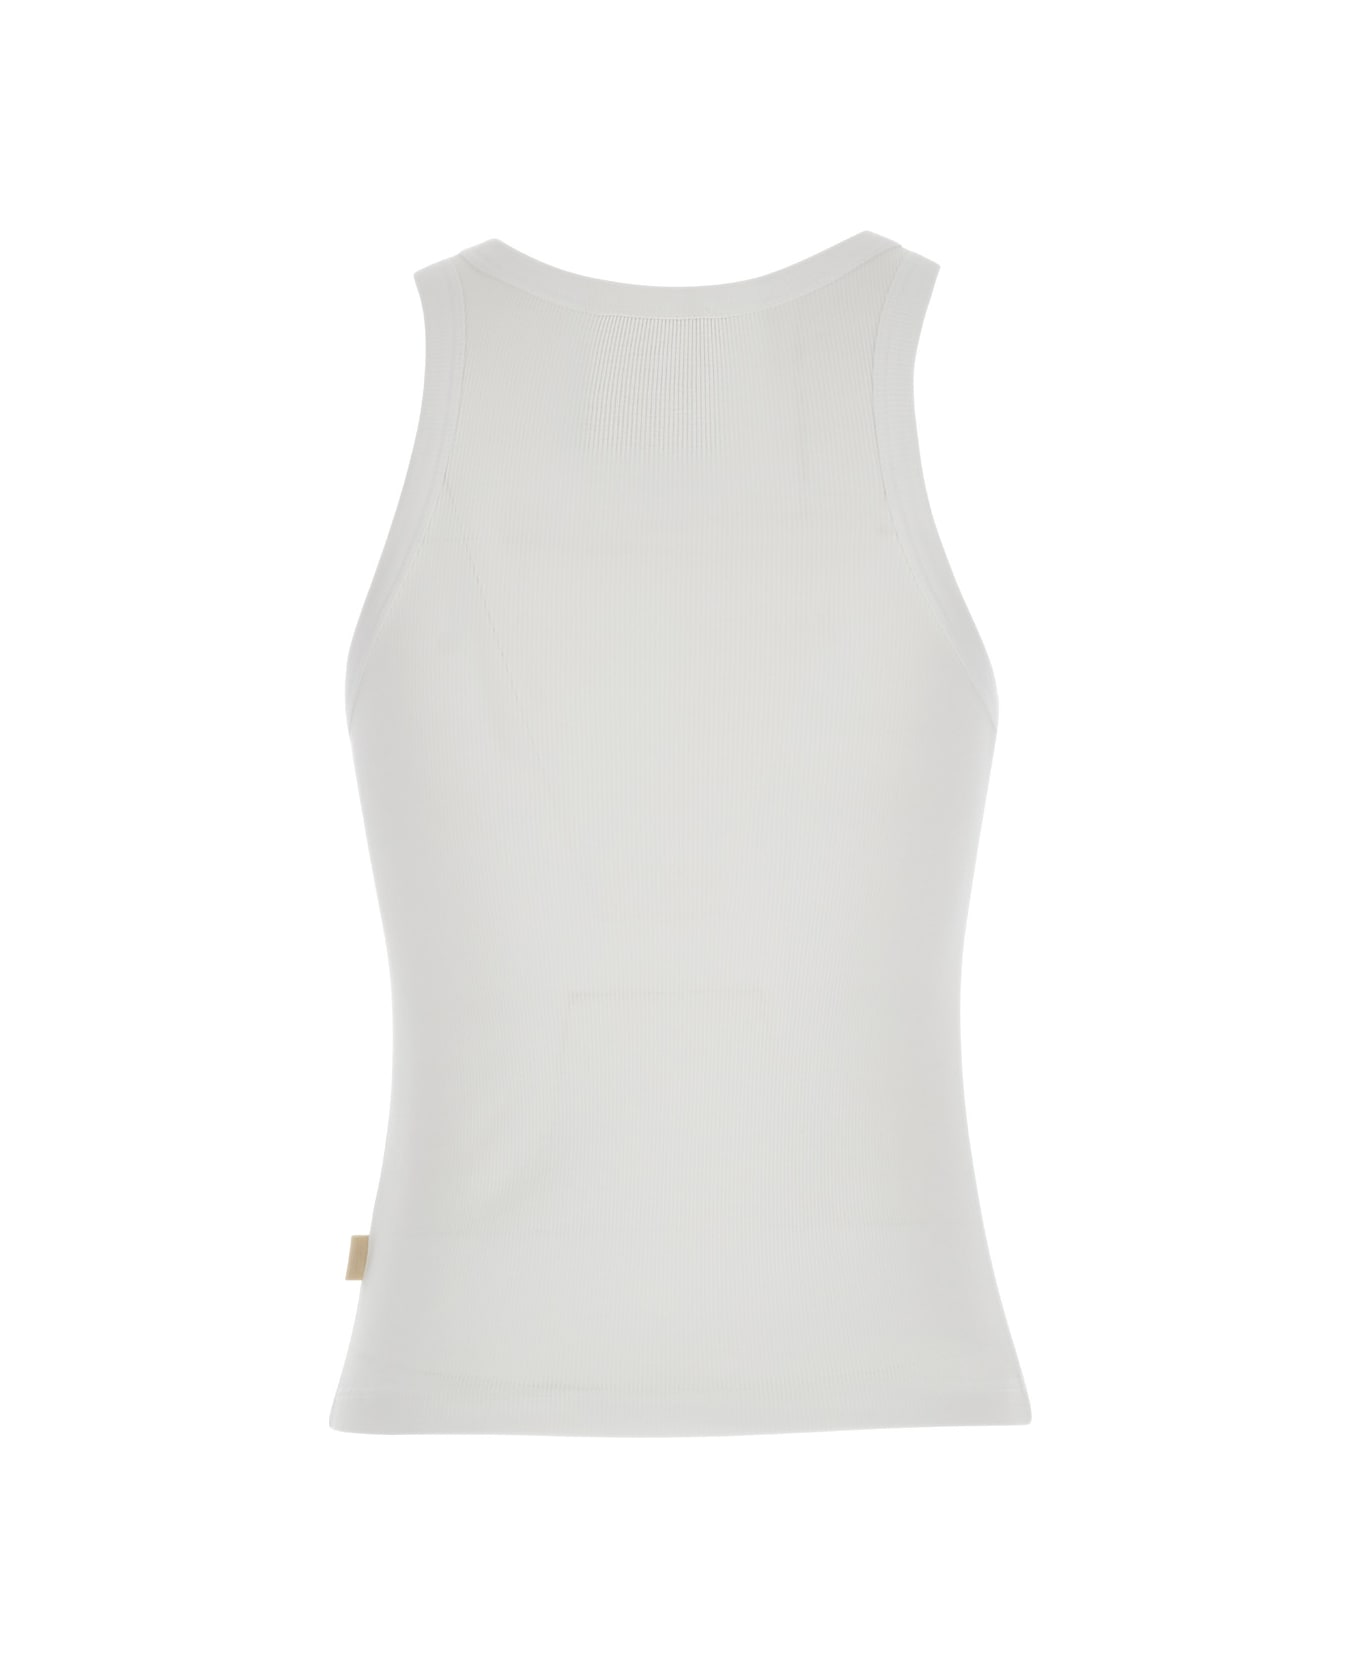 SEMICOUTURE White Ribbed Tank Top With U Neckline In Cotton And Modal Blend Woman - White